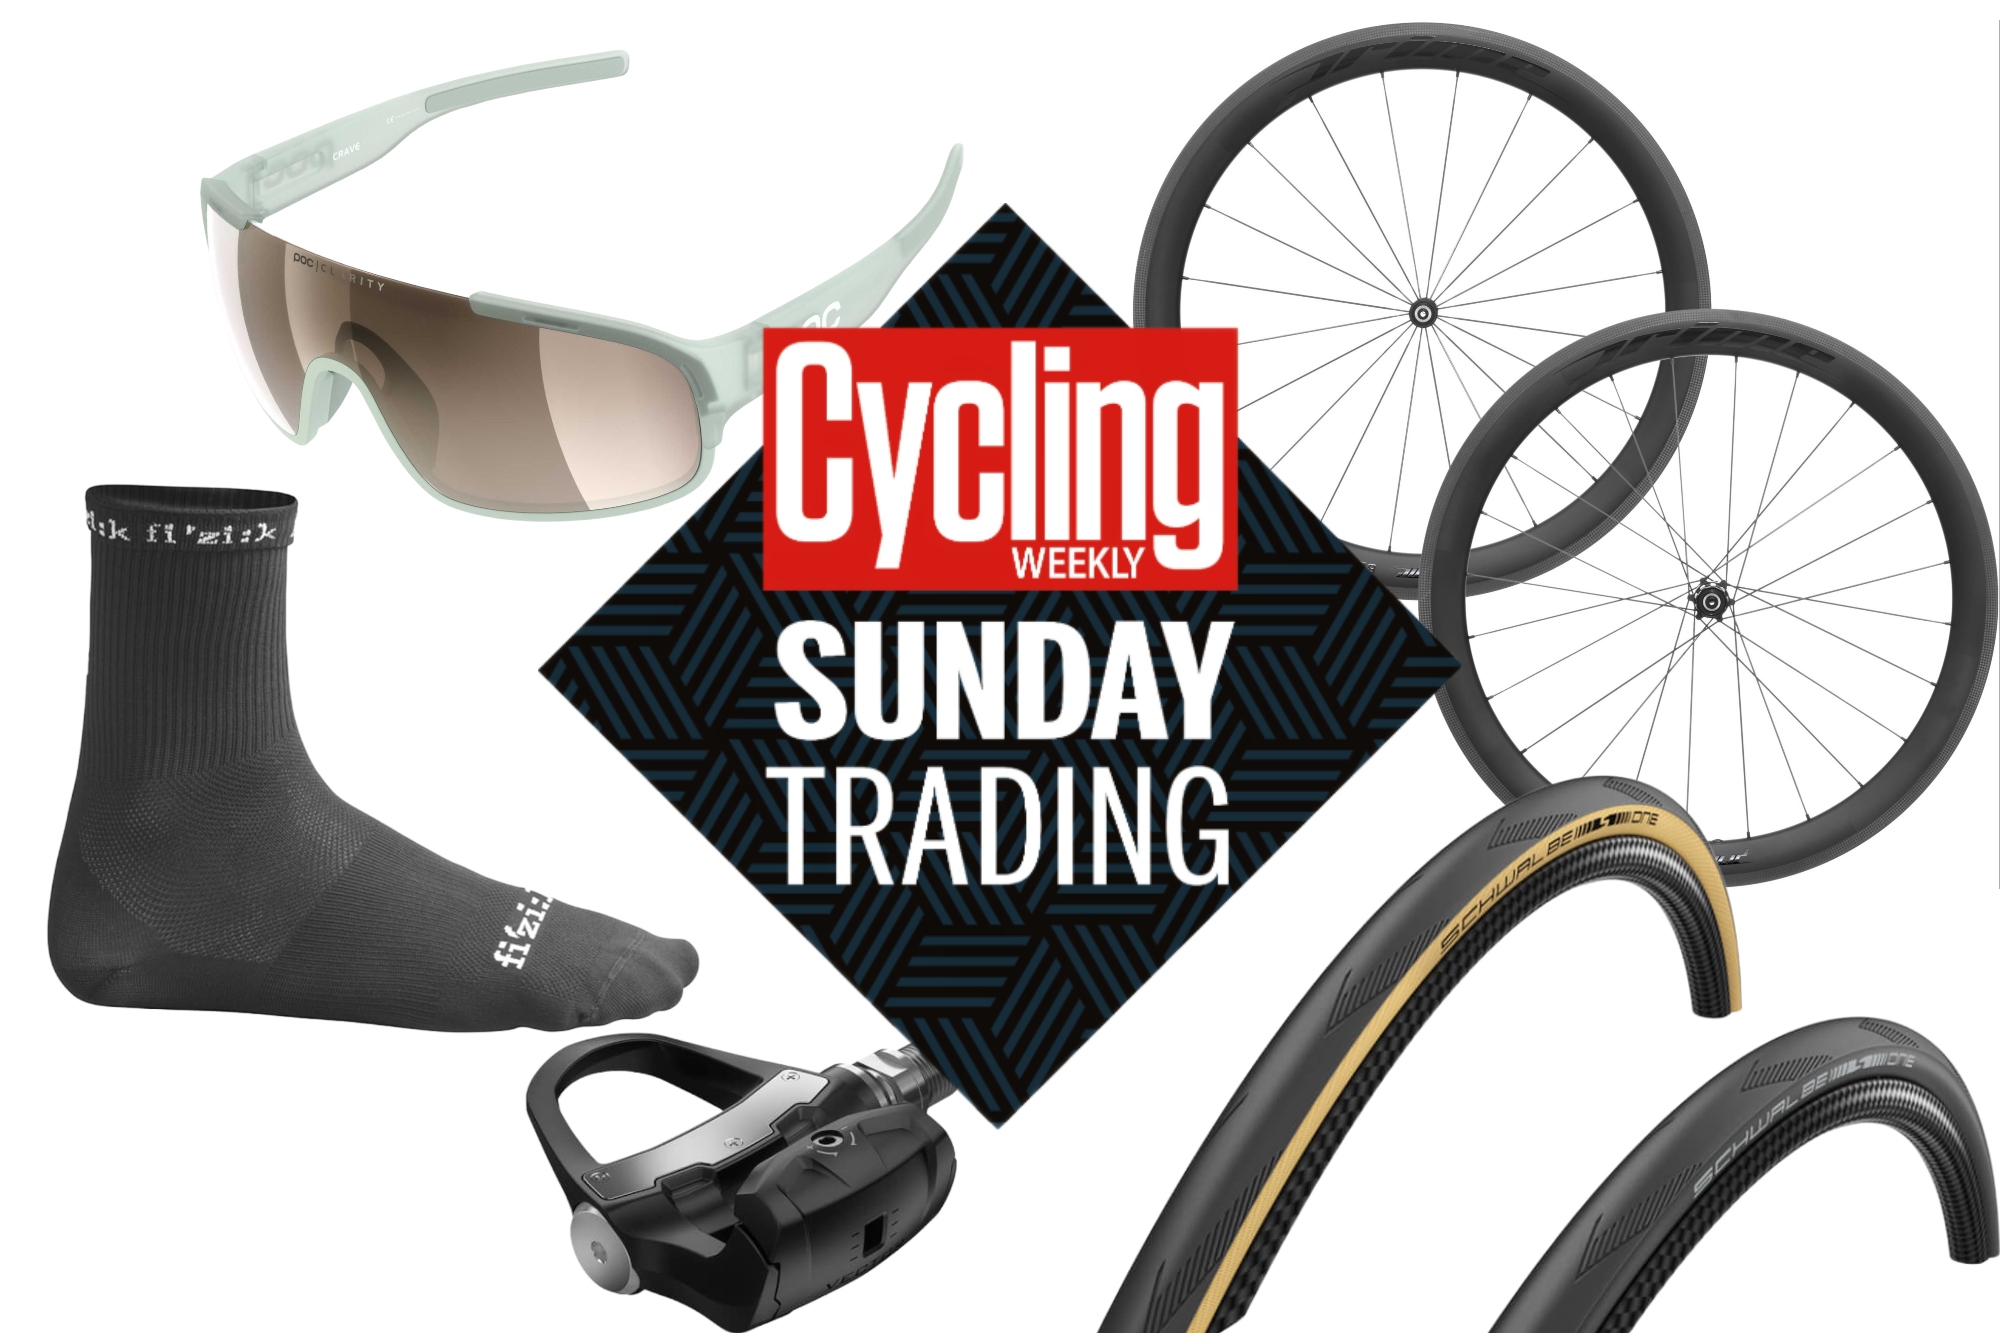 Sunday Trading Schwalbe Pro One Tires Poc Sunglasses Prime Carbon Wheels And Much More Cycling Weekly - handcuffs roblox gear id